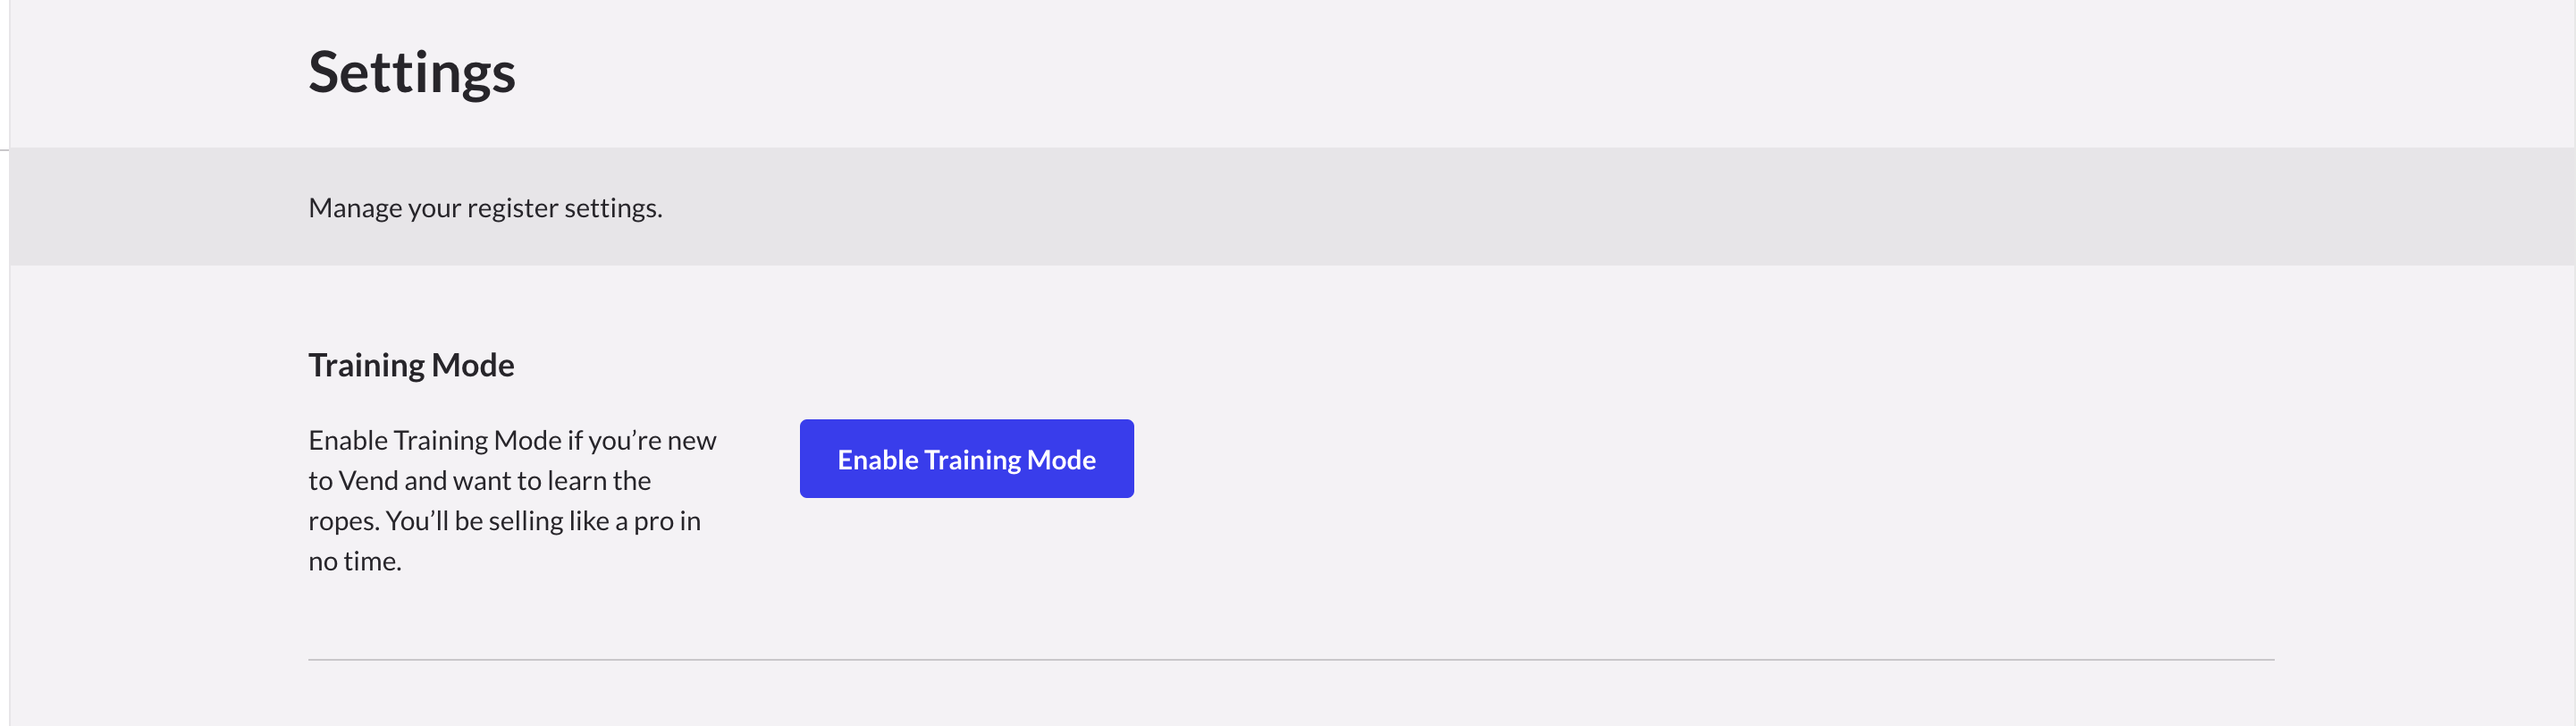 Enable-training-mode.png